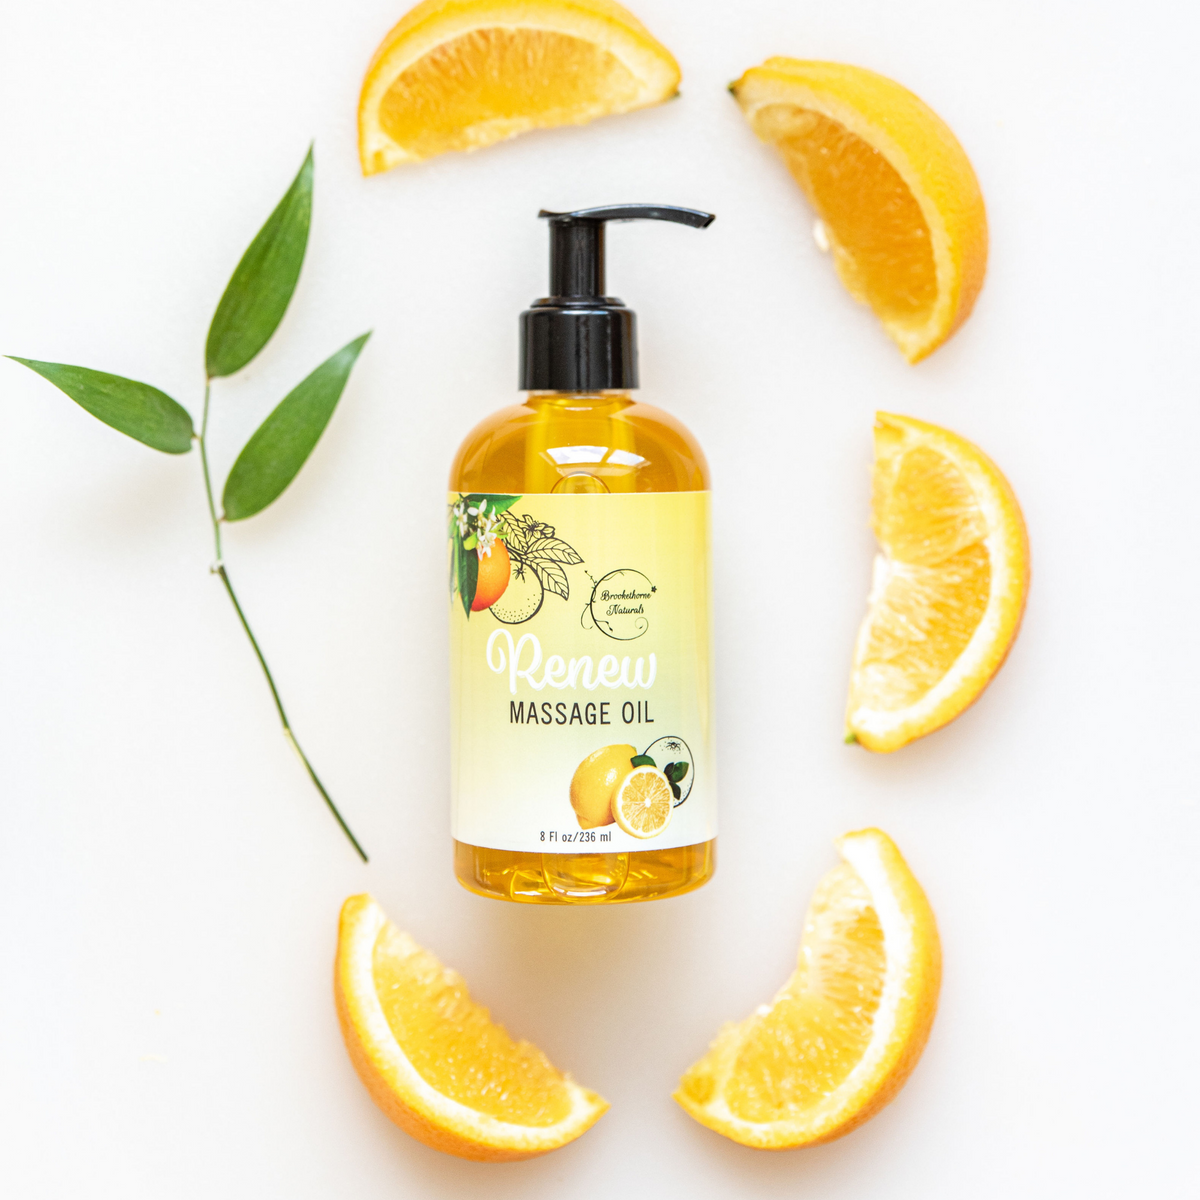 Renew Massage Oil pictured with oranges